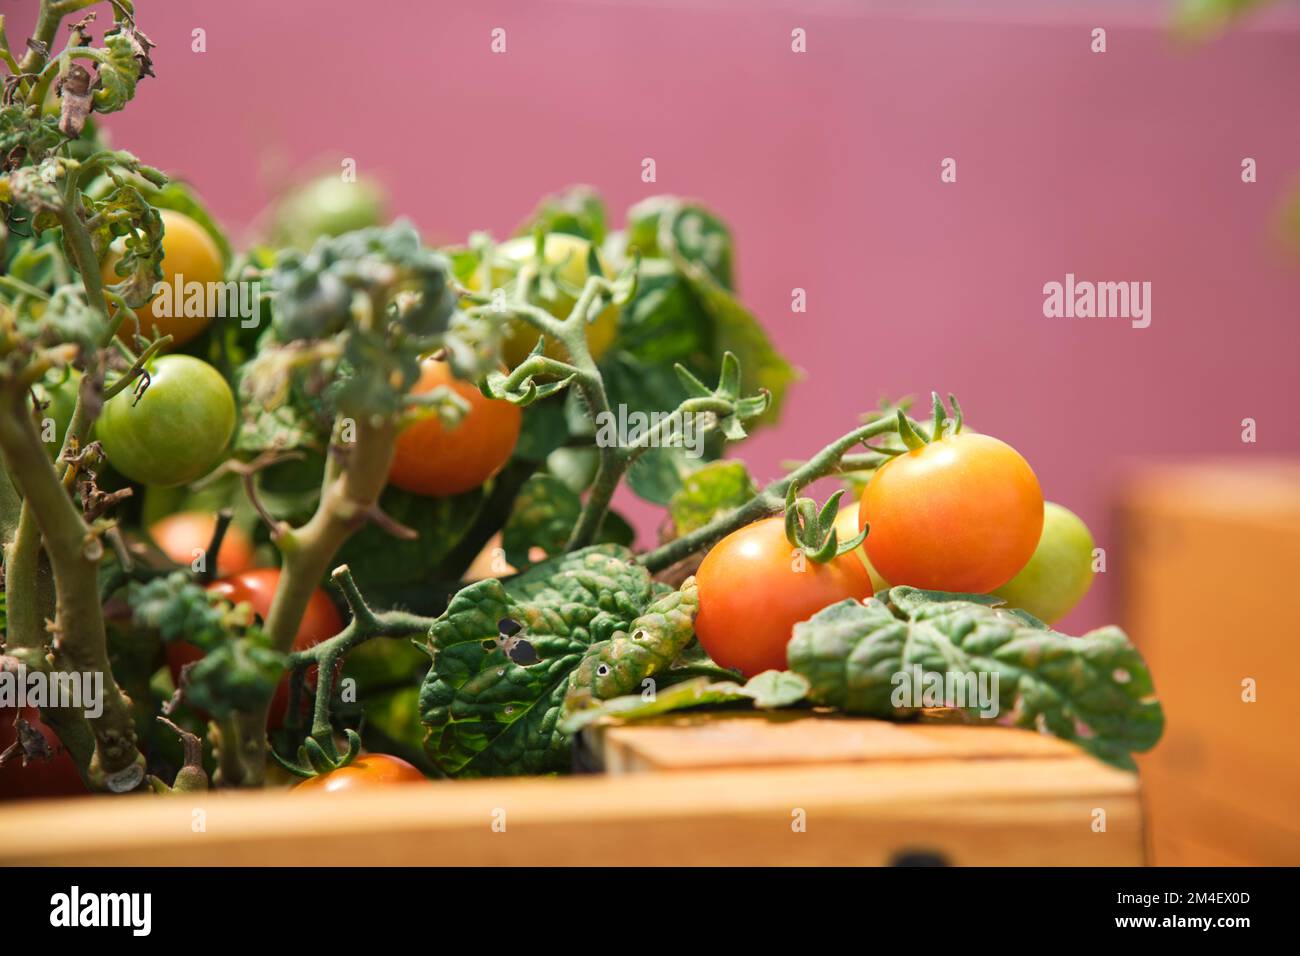 Tomatoes planted in a urban community garden located on the rooftop of a building. Concepts of sustainable agriculture, ecology and healthy living. Stock Photo